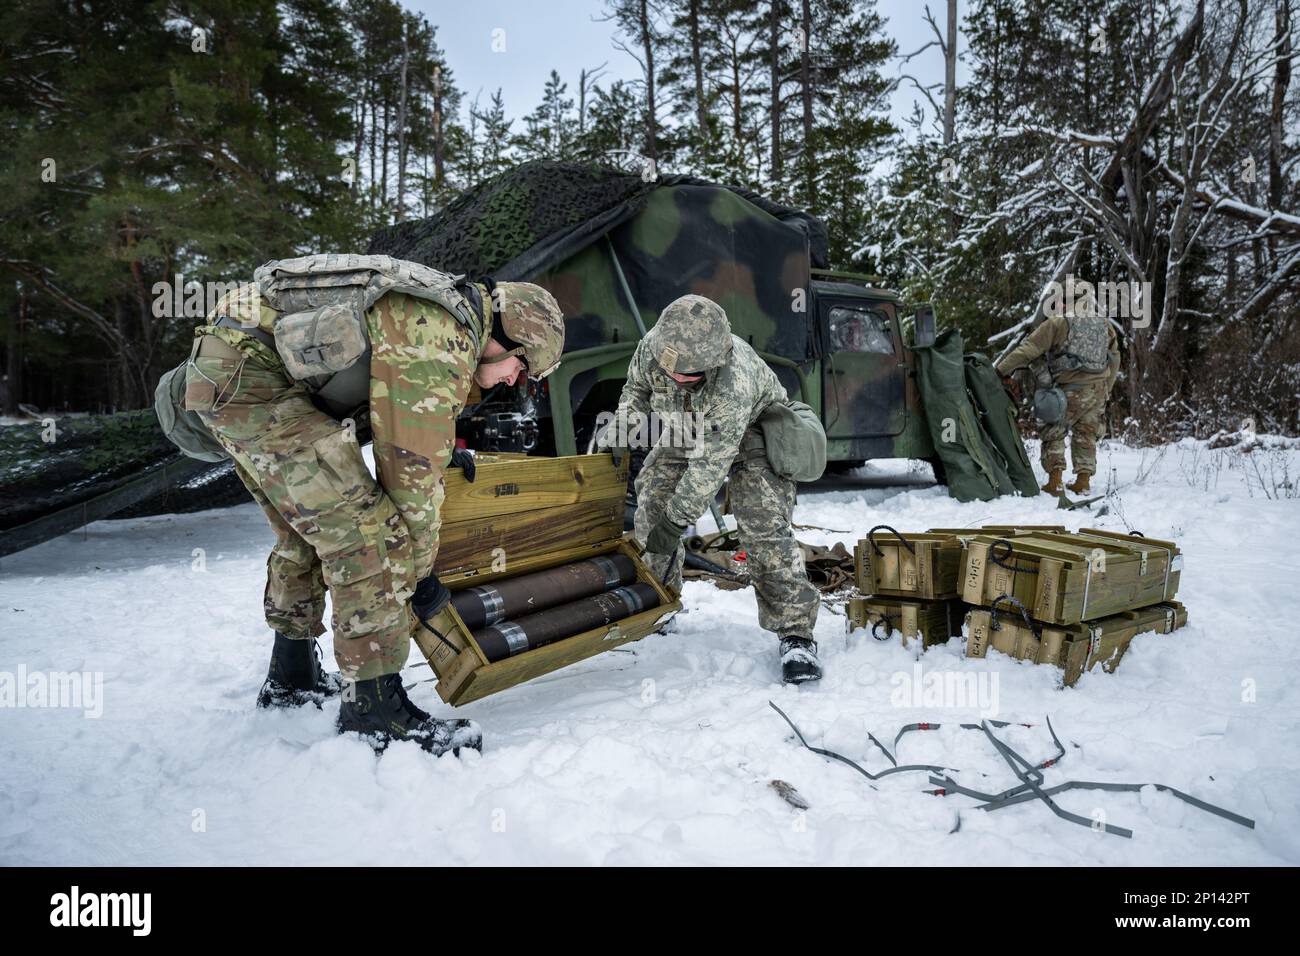 Army Sgt. Meranda Leisgana and Sgt. Trayton Pankratz, 1-120th Field Artillery Regiment, opens a wooden crate of 105mm High Explosive shells for the M119 howitzer during Northern Strike 23-1, Jan. 25, 2023, at Camp Grayling, Mich. Units that participate in Northern Strike’s winter iteration build readiness by conducting joint, cold-weather training designed to meet objectives of the Department of Defense’s Arctic Strategy. Stock Photo